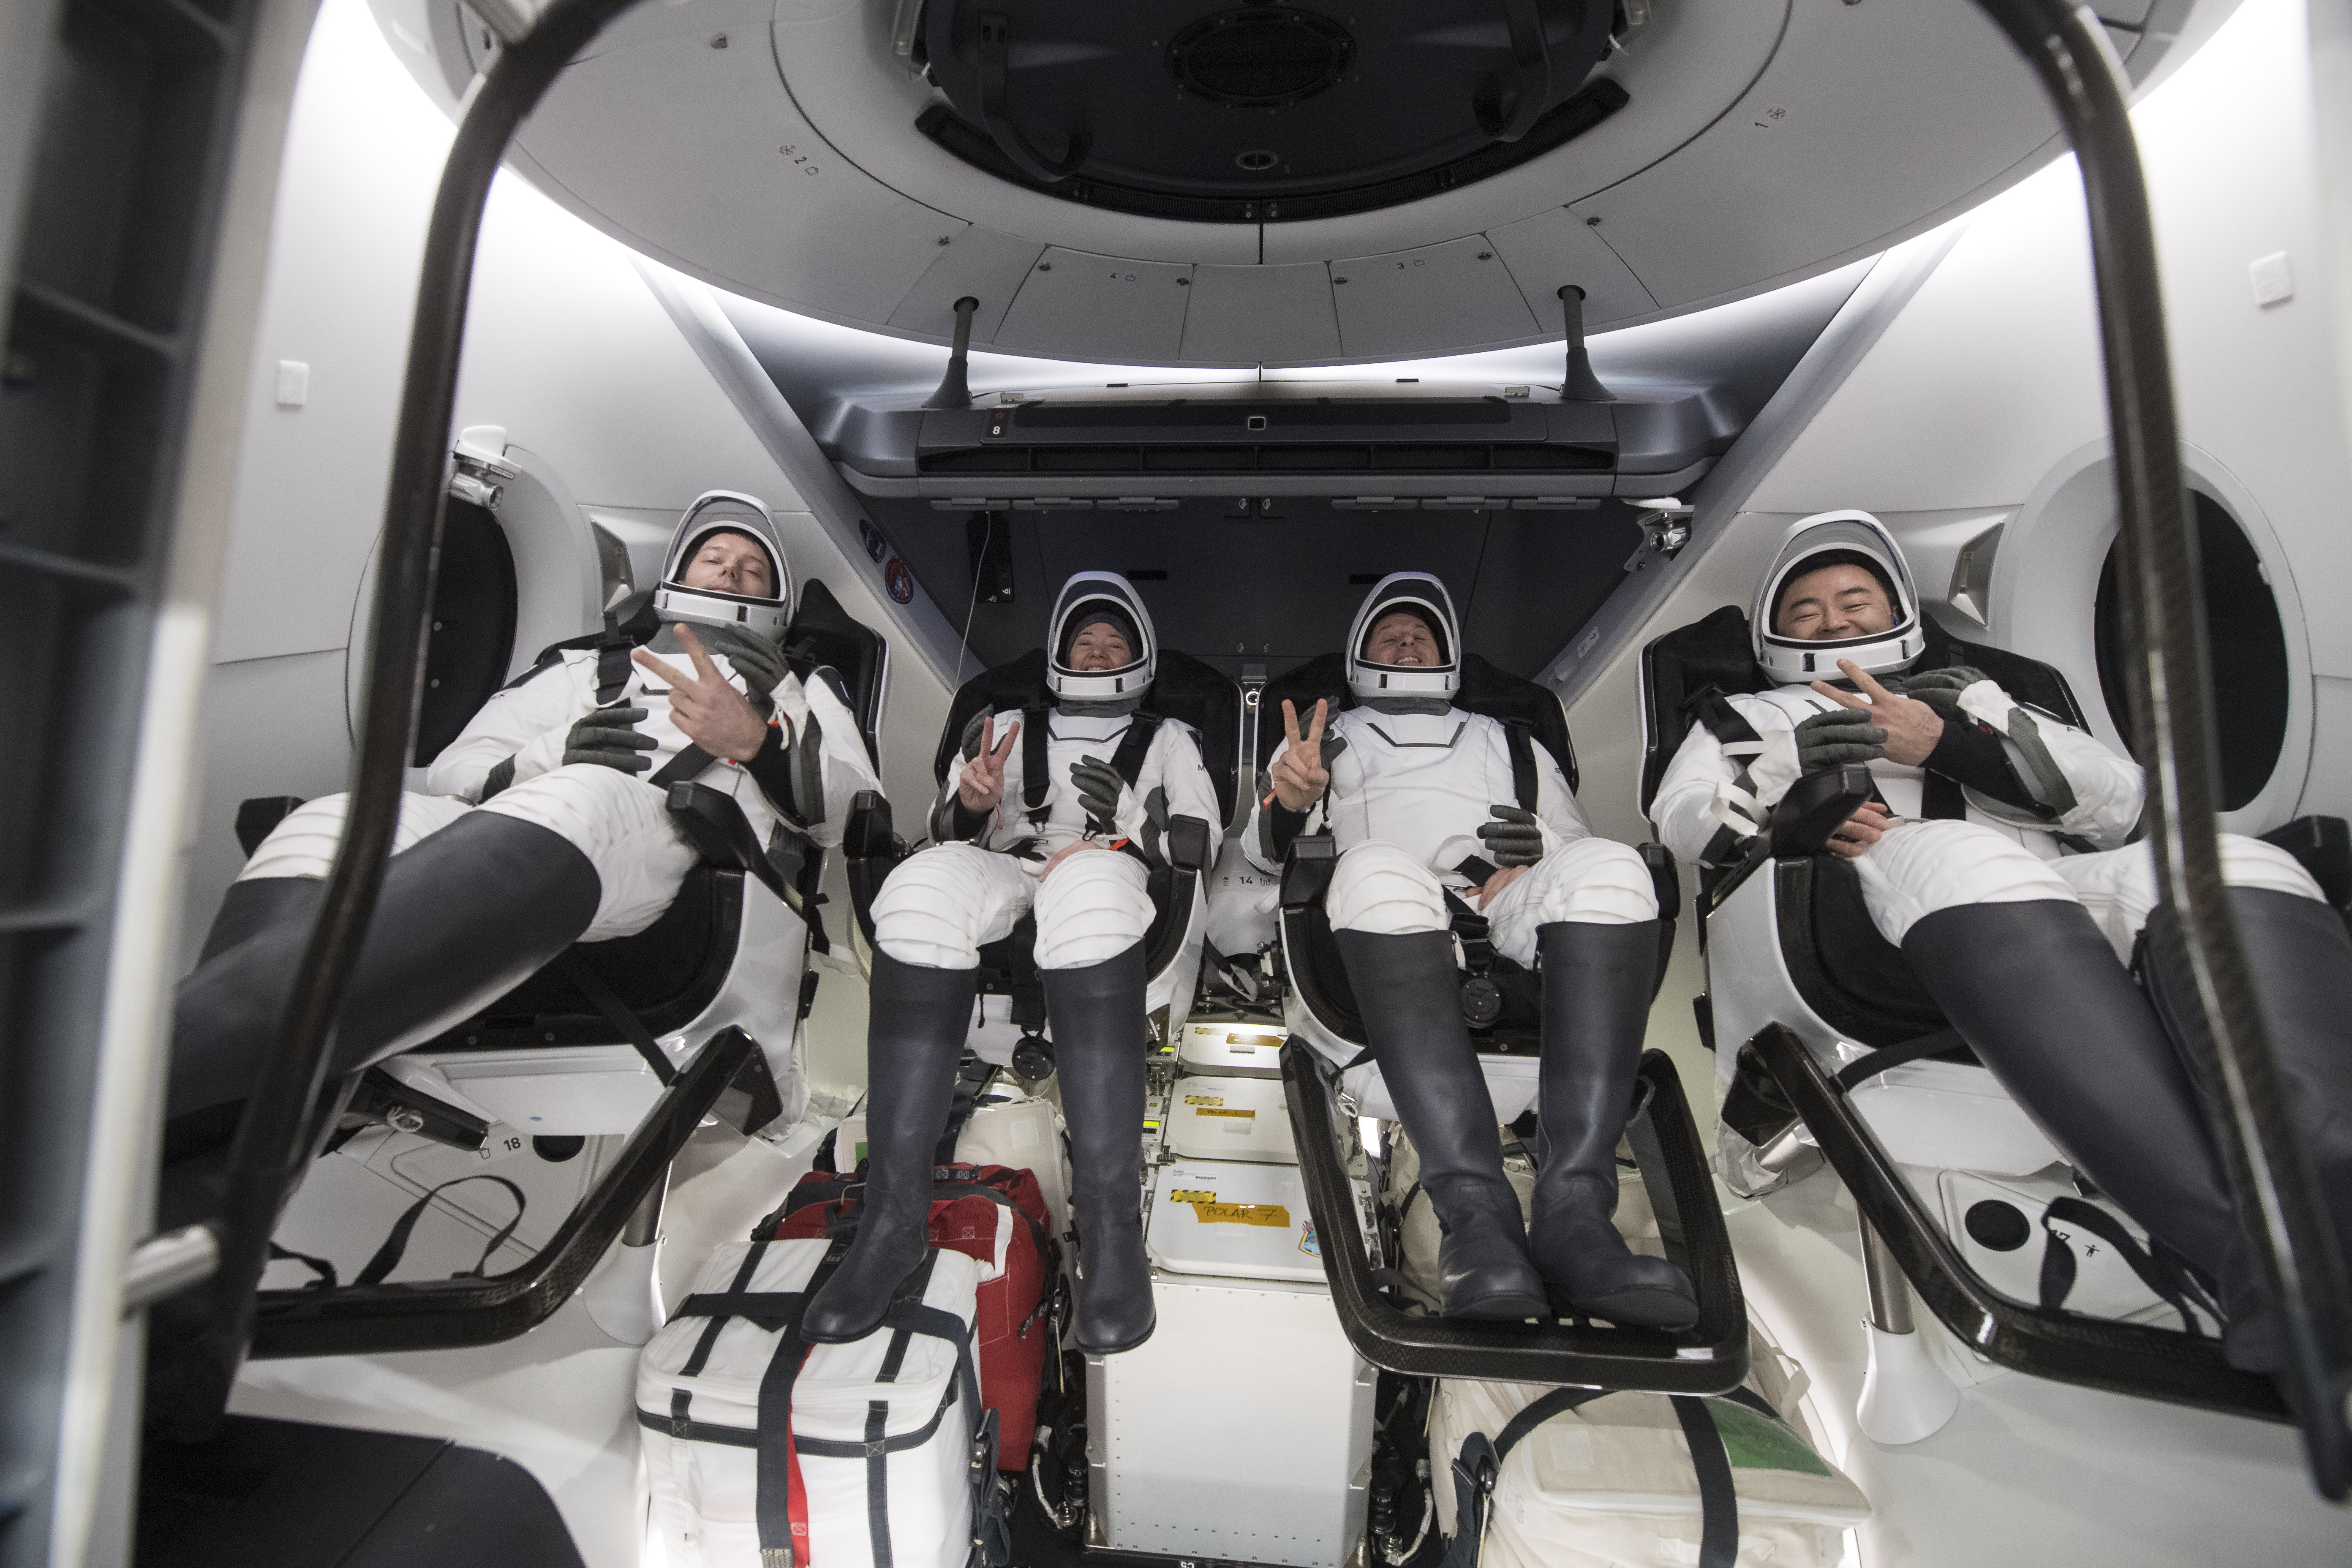 In this photo provided by NASA, from left to right, European Space Agency astronaut Thomas Pesquet, NASA astronauts Megan McArthur and Shane Kimbrough, and Japan Aerospace Exploration Agency astronaut Akihiko Hoshide gesture inside the SpaceX Dragon spacecraft onboard the SpaceX GO Navigator recovery ship shortly after having landed in the Gulf of Mexico off the coast of Pensacola, Fla., Monday, Nov. 8, 2021. The astronauts returned to Earth on Monday to end a 200-day space station mission that began last spring. (Aubrey Gemignani/NASA via AP)